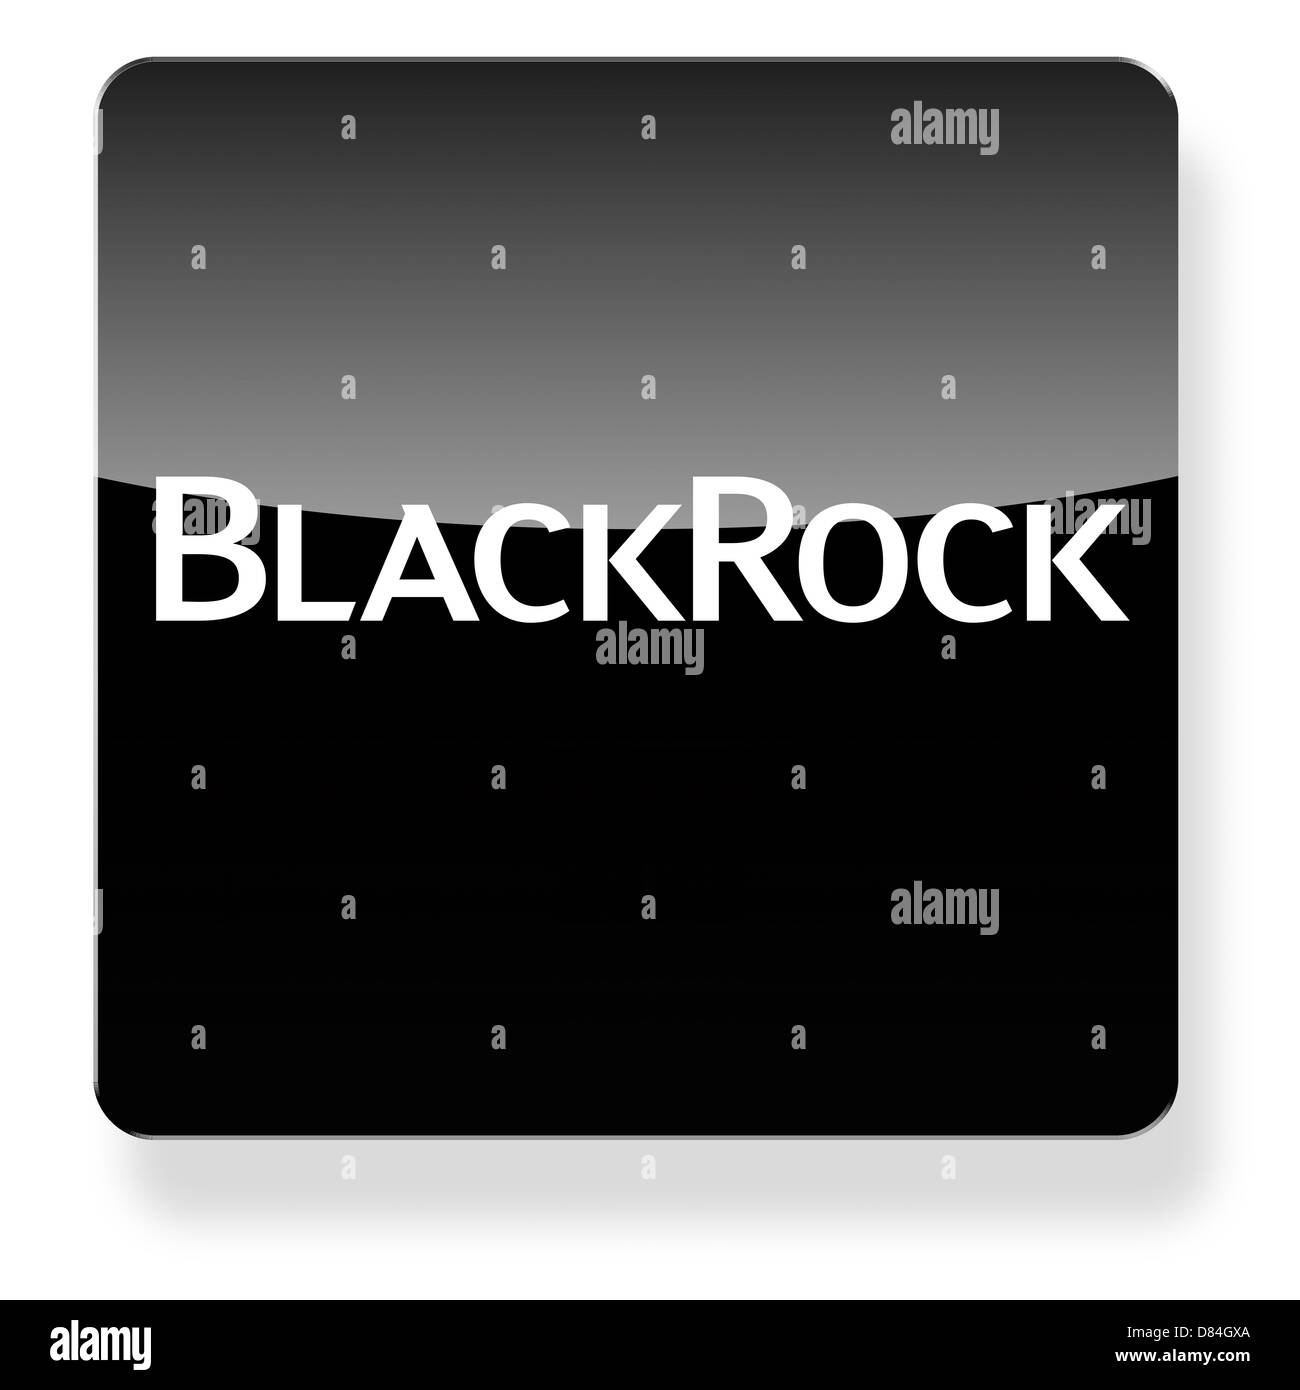 BlackRock logo as an app icon. Clipping path included. Stock Photo